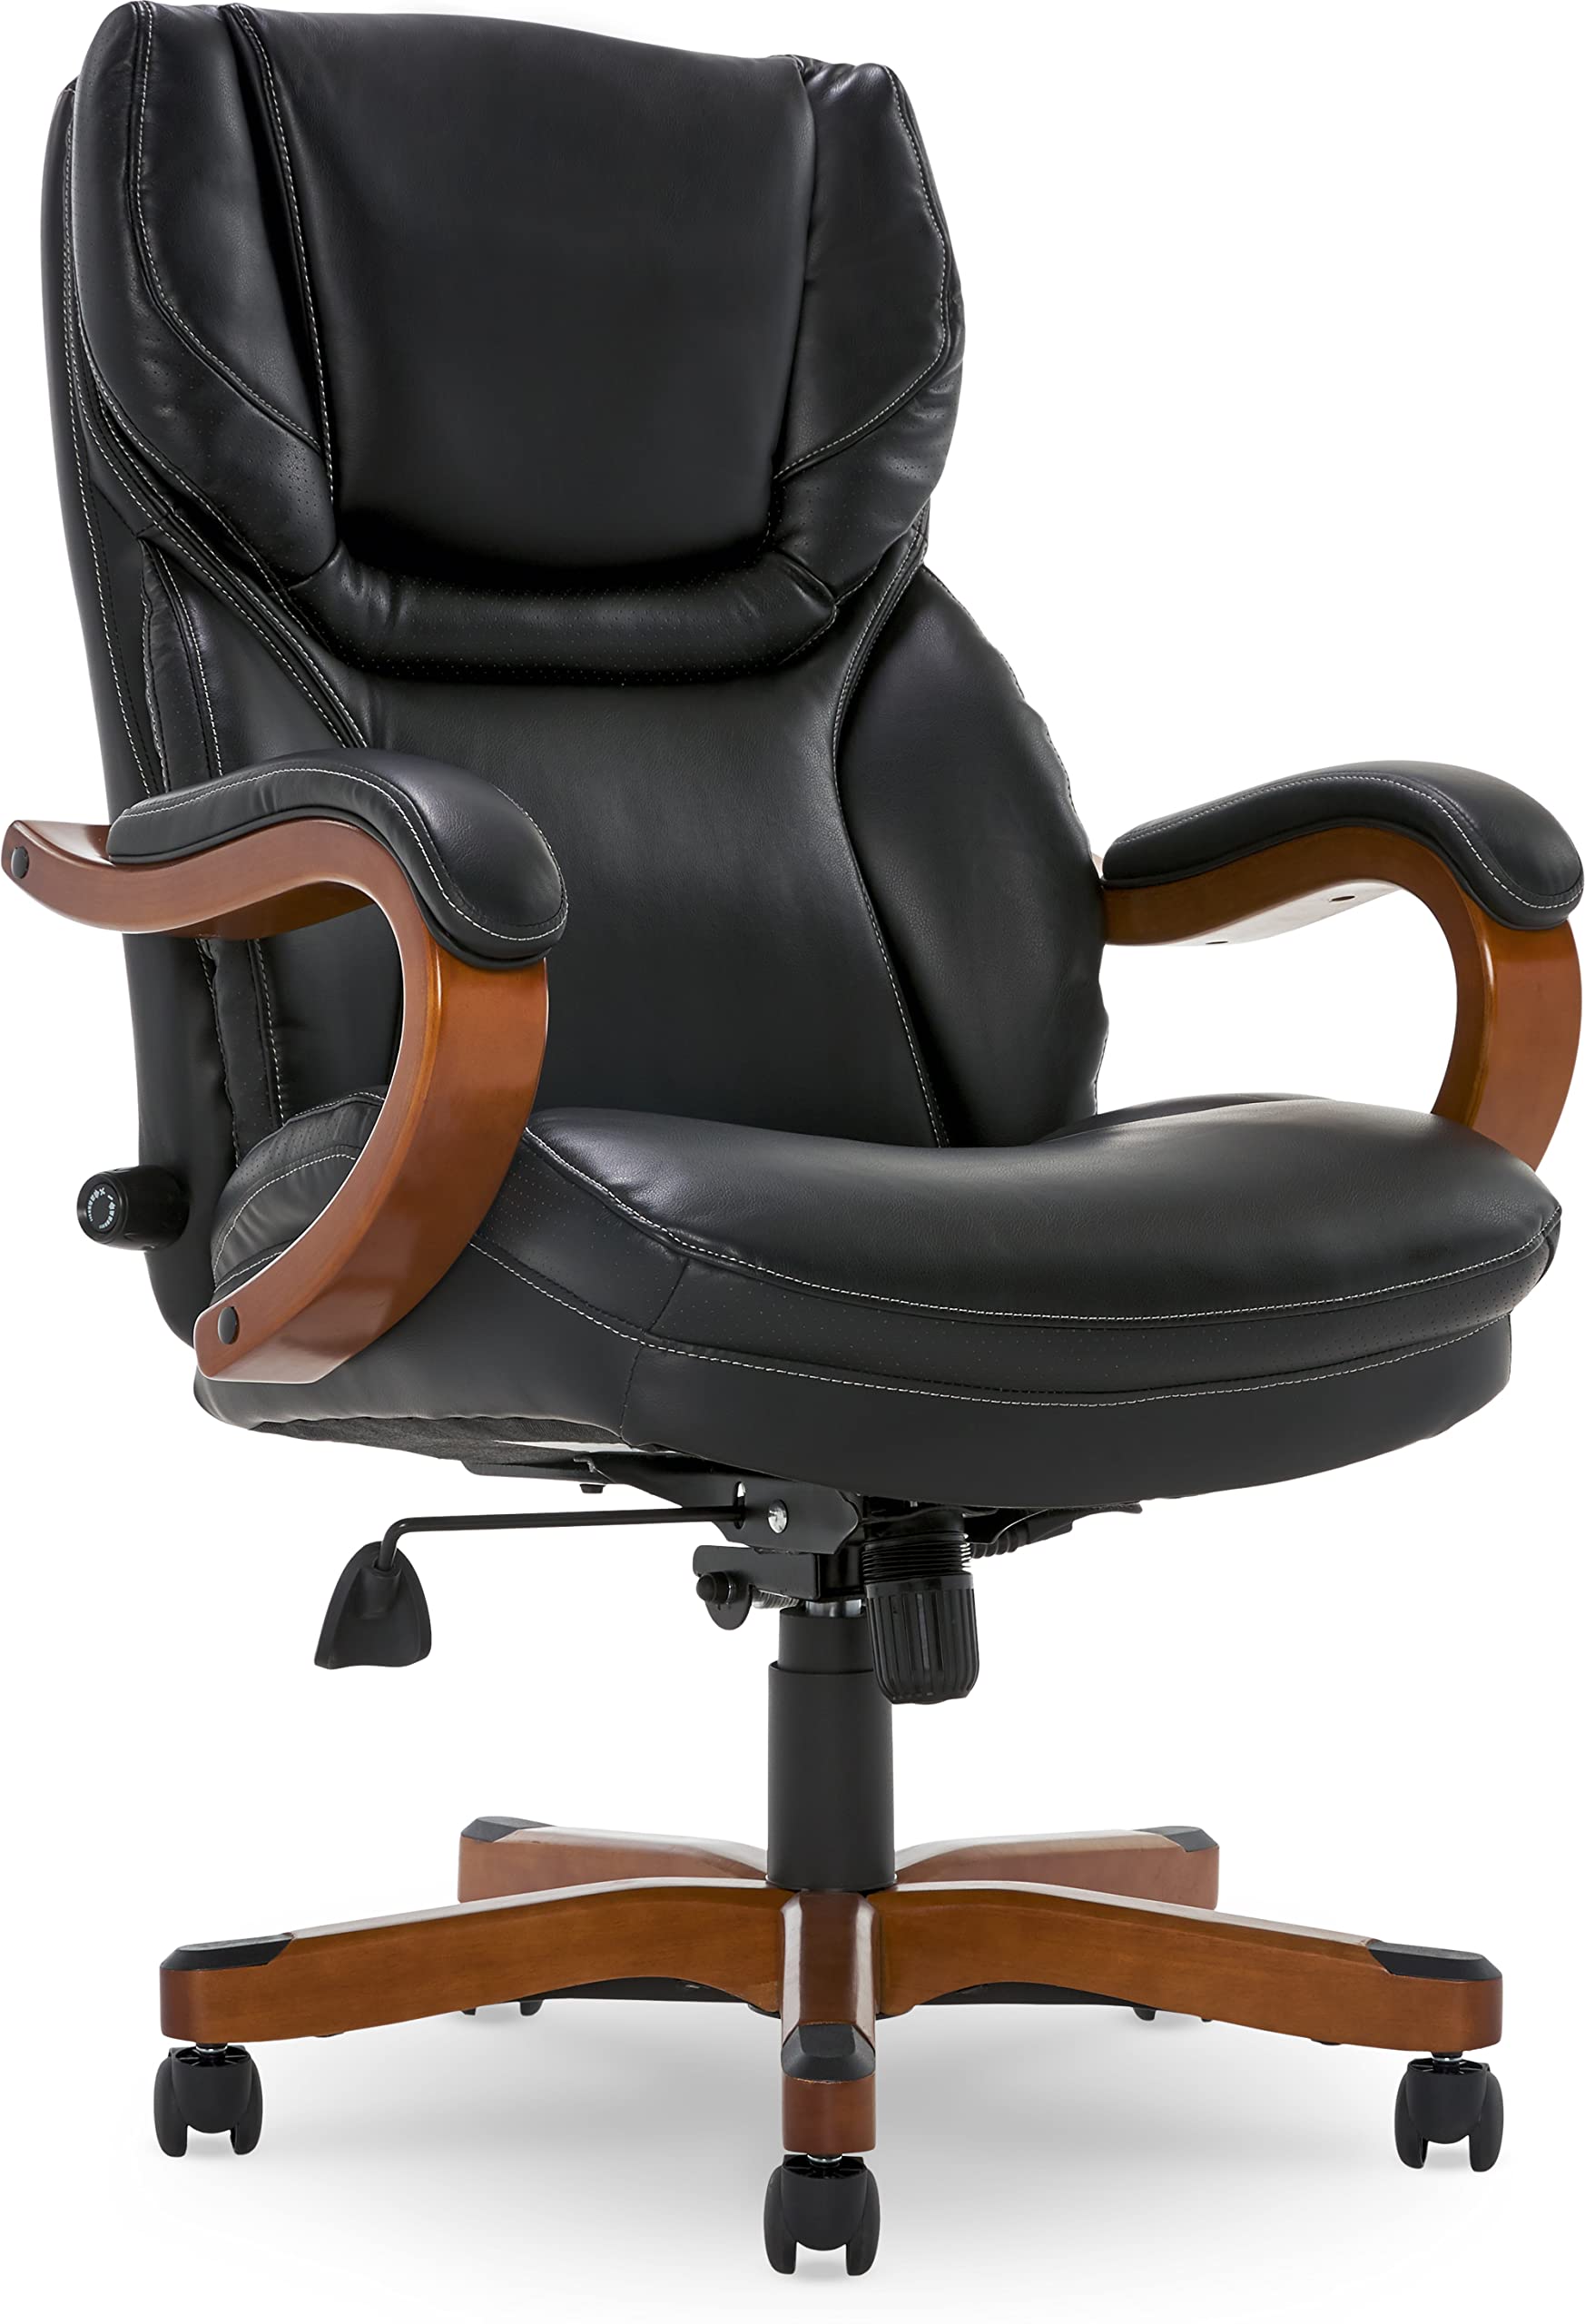 Serta Big and Tall Executive Office Chair with Wood Acc...